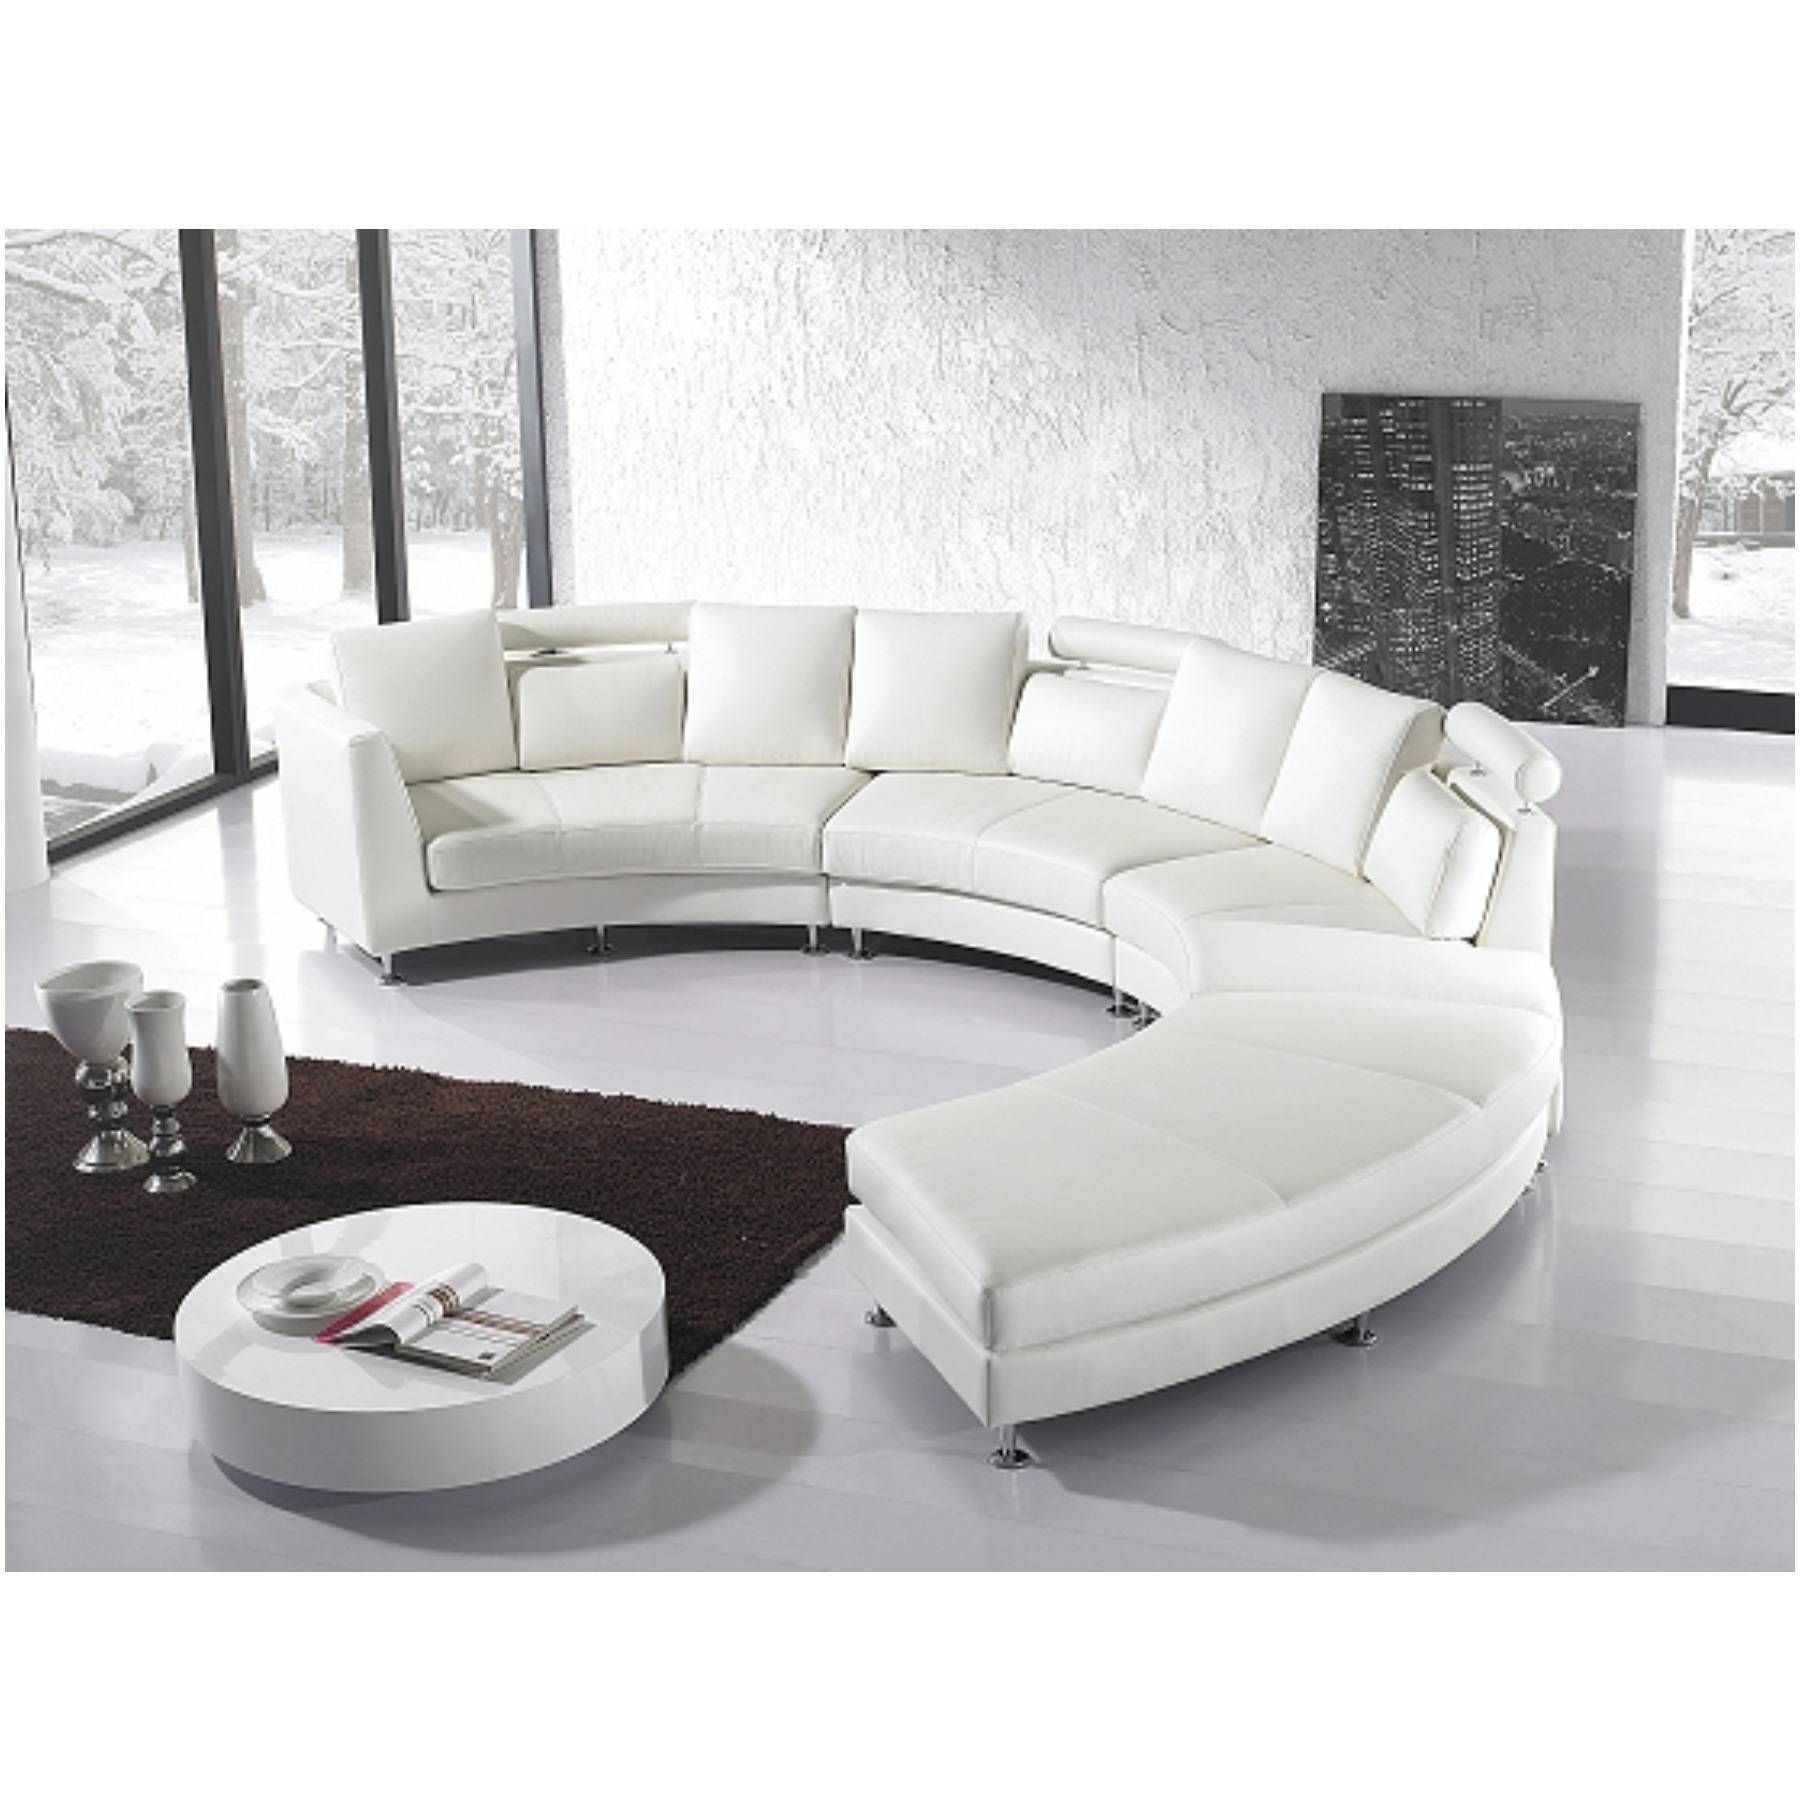 Round Sectional Sofa | Roselawnlutheran Intended For Semi Round Sectional Sofas (View 14 of 15)